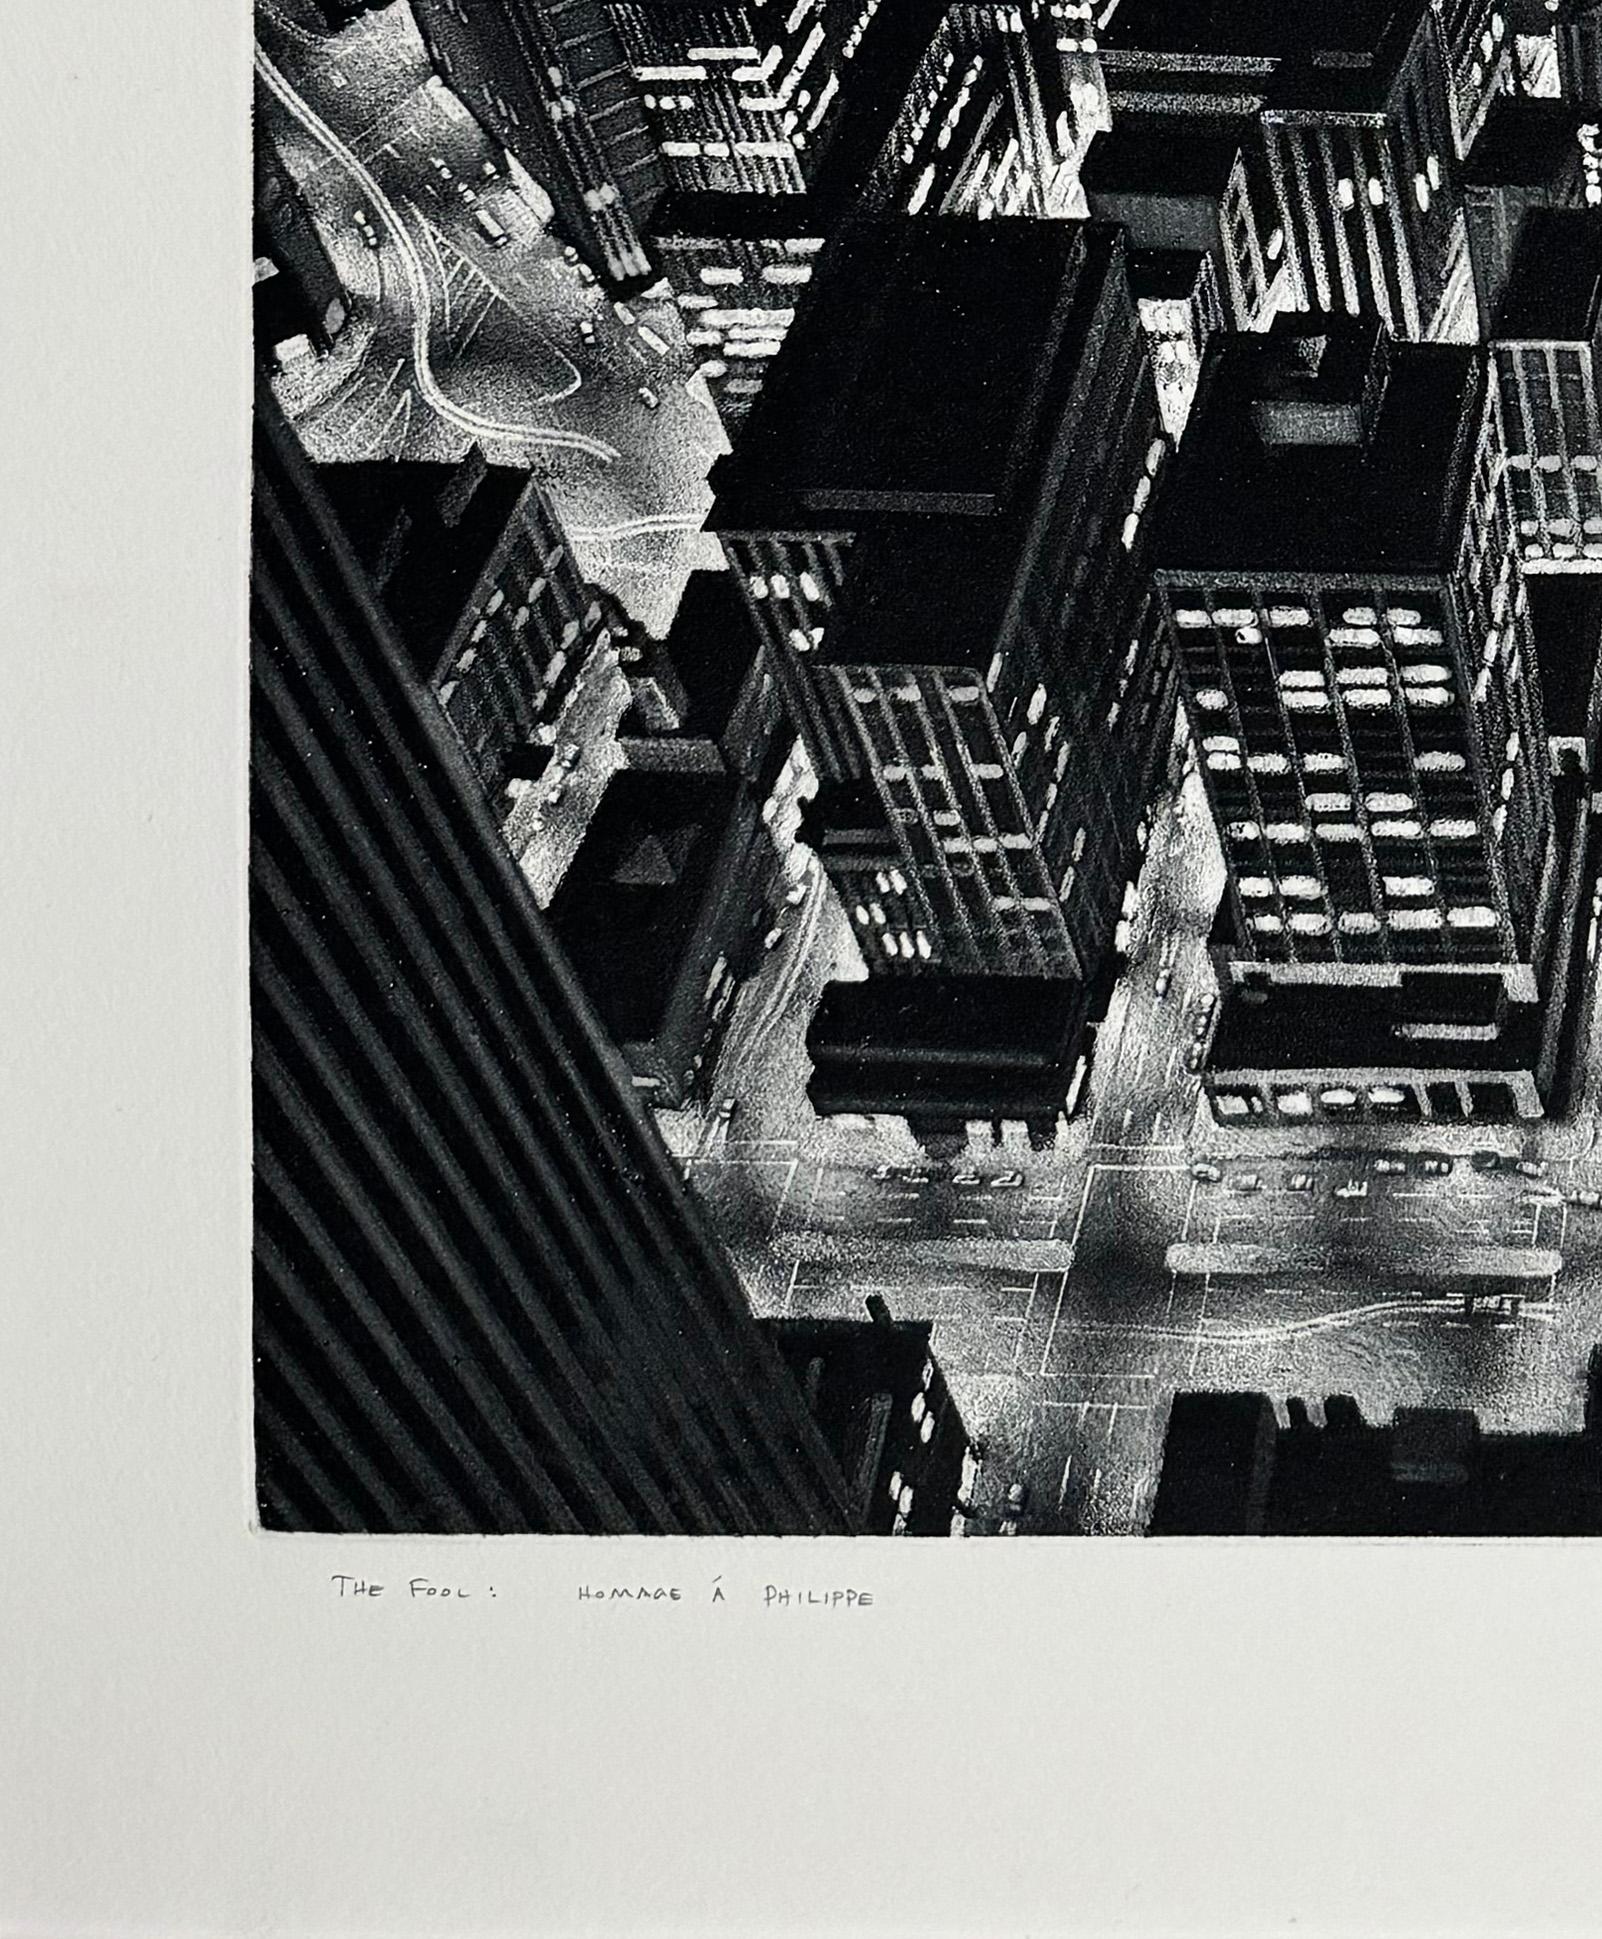 Medium: Etching with aquatint
Year: 2024
Edition: 25
Image Size: 24 x 18 inches
Signed, titled and numbered in pencil by the artist

Dramatic etching of high wire walker Philippe Petit performing his walk between the Twin Towers in New York. From